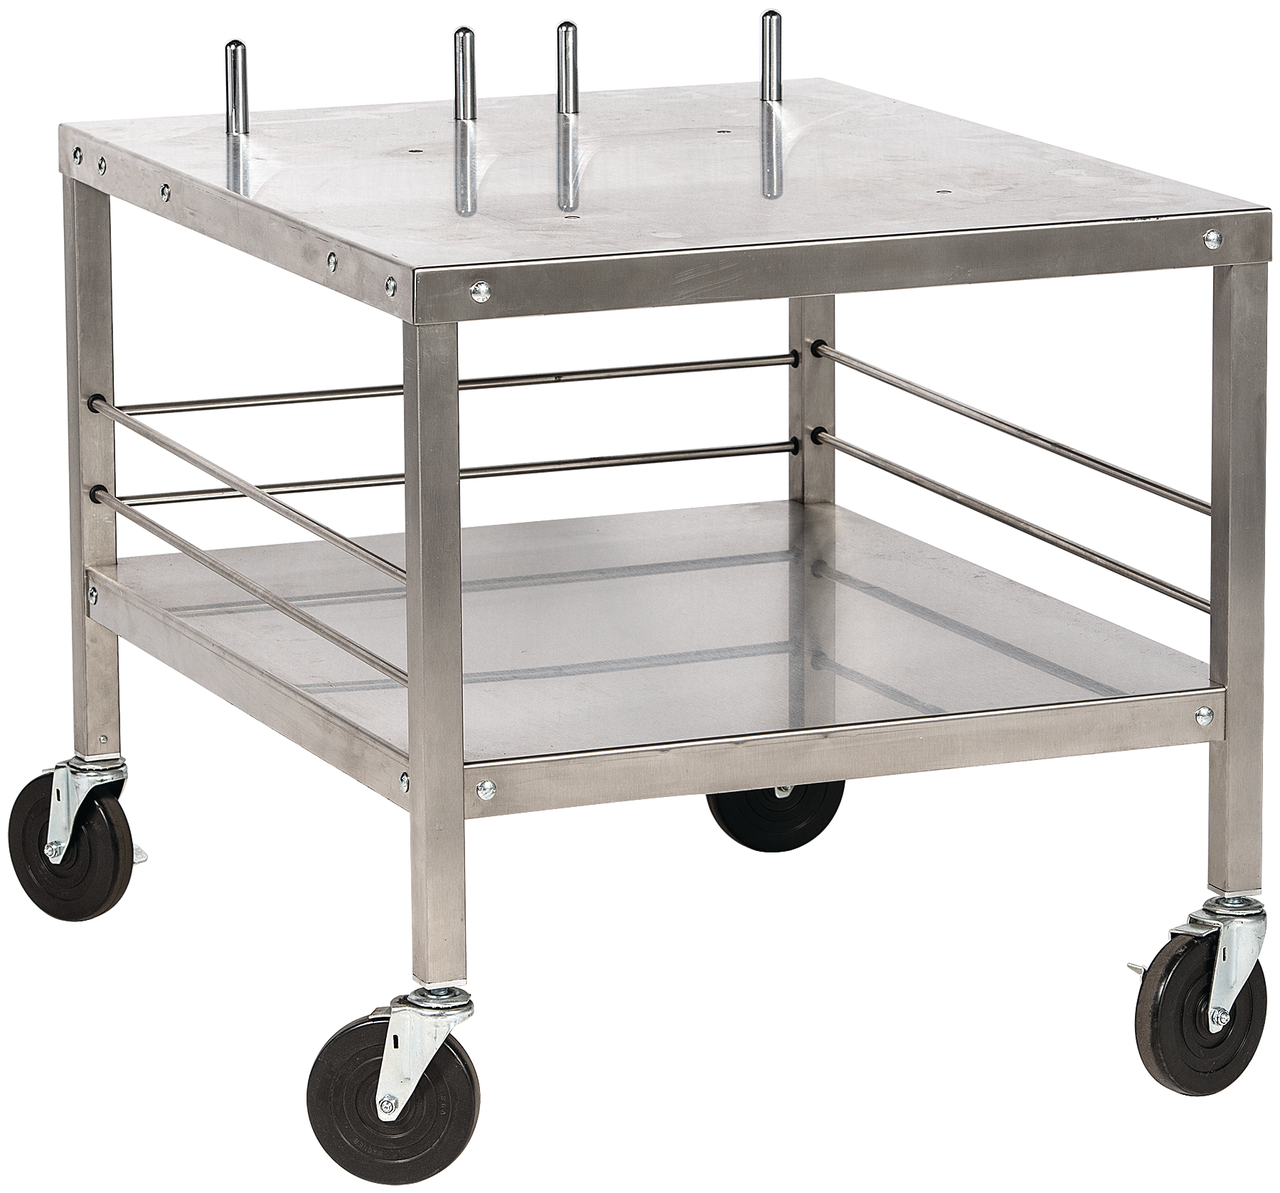 https://www.hobartcorp.com/sites/default/files/webdam-assets/1280_Mixer%20Table_product%20image.png